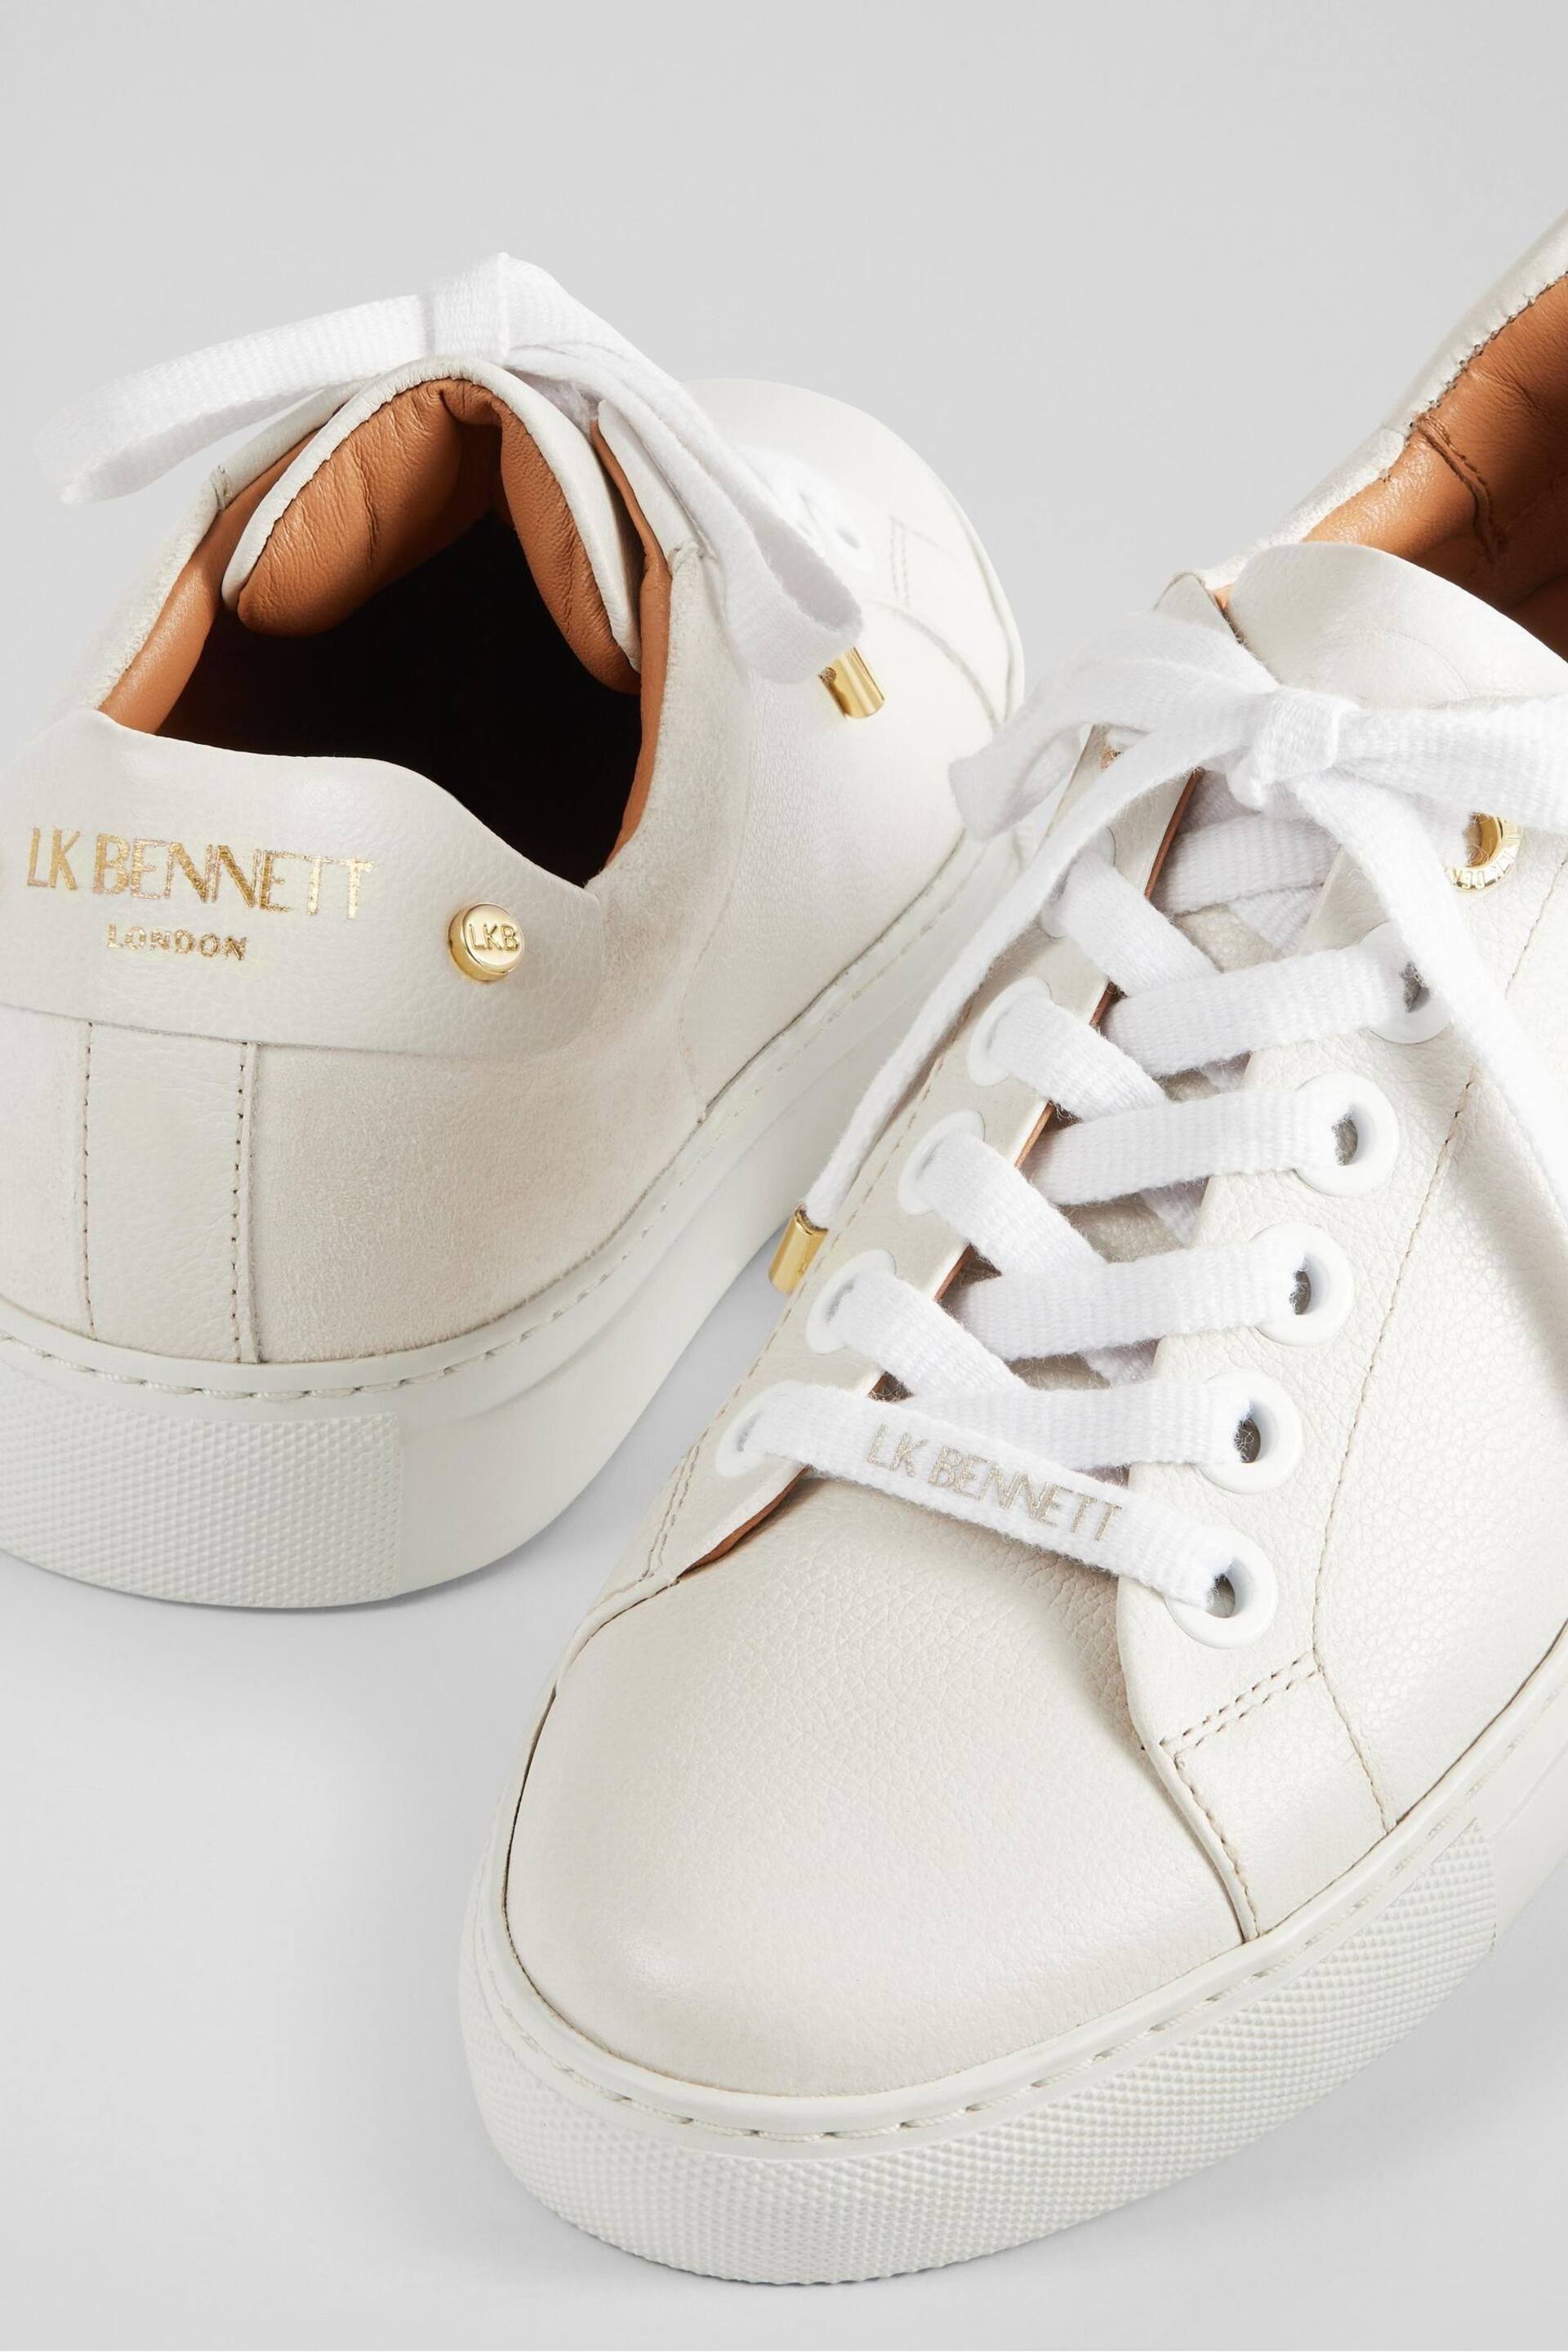 LK Bennett Signature Leather Trainers - Image 4 of 7